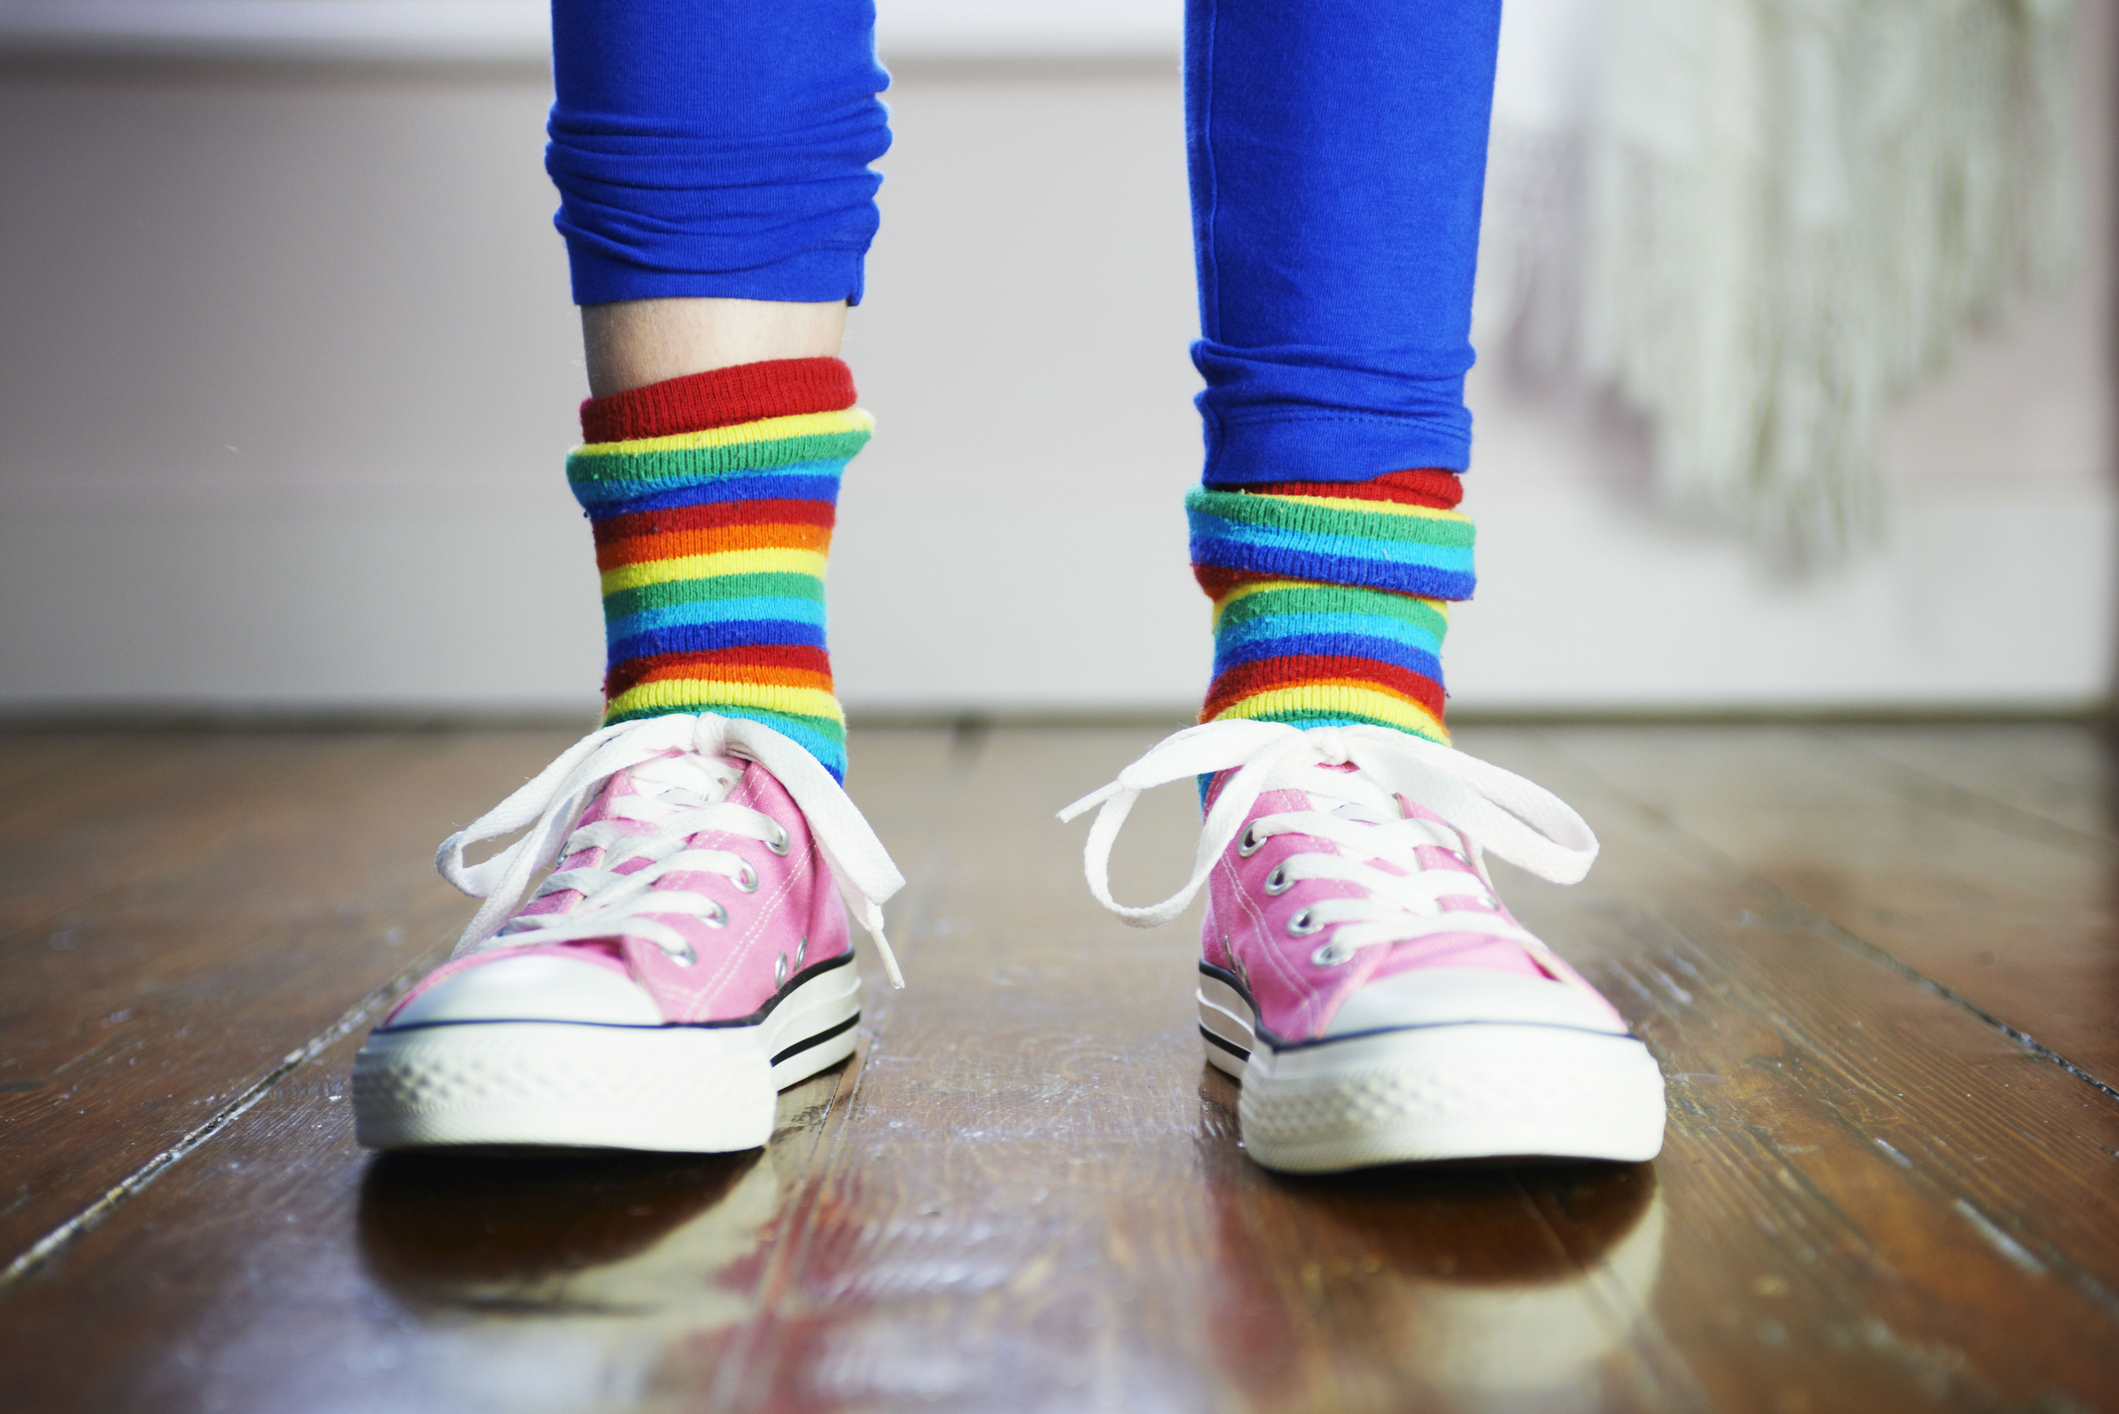 kid wearing pink sneakers and rainbow-striped socks standing on a wooden floor